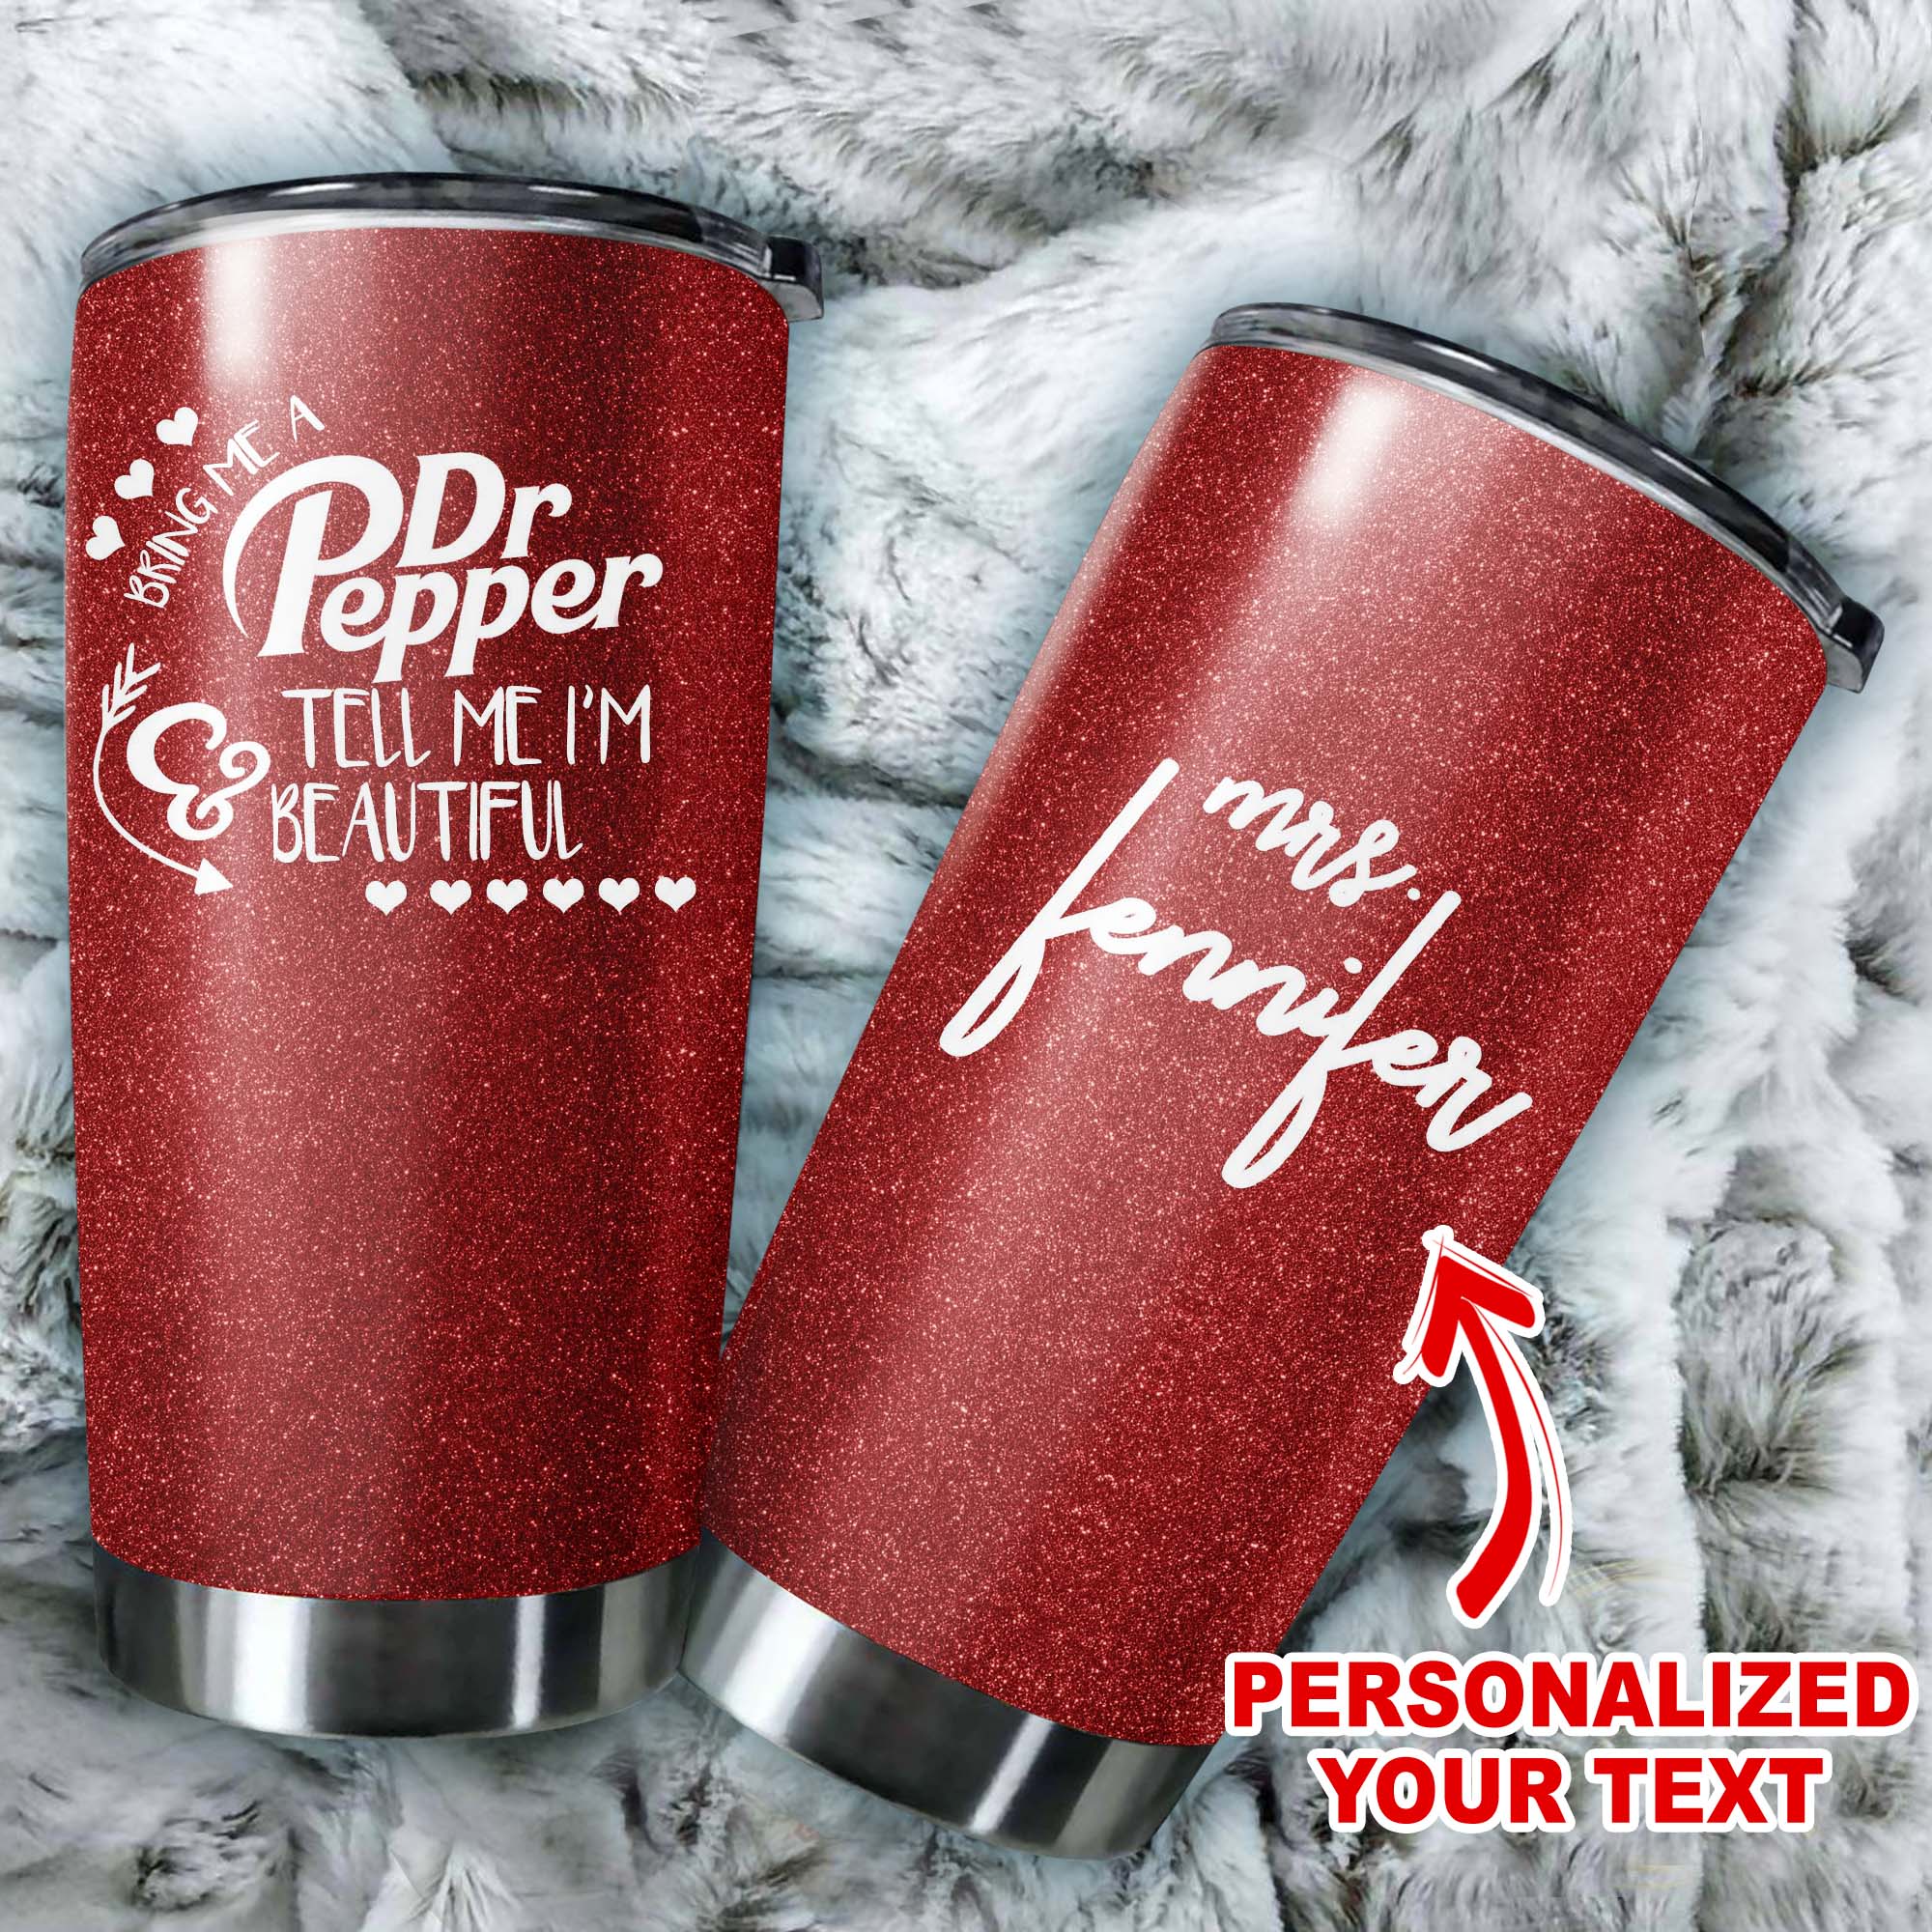 Personalized dr pepper tell me i'm beautiful all over printed tumbler 2